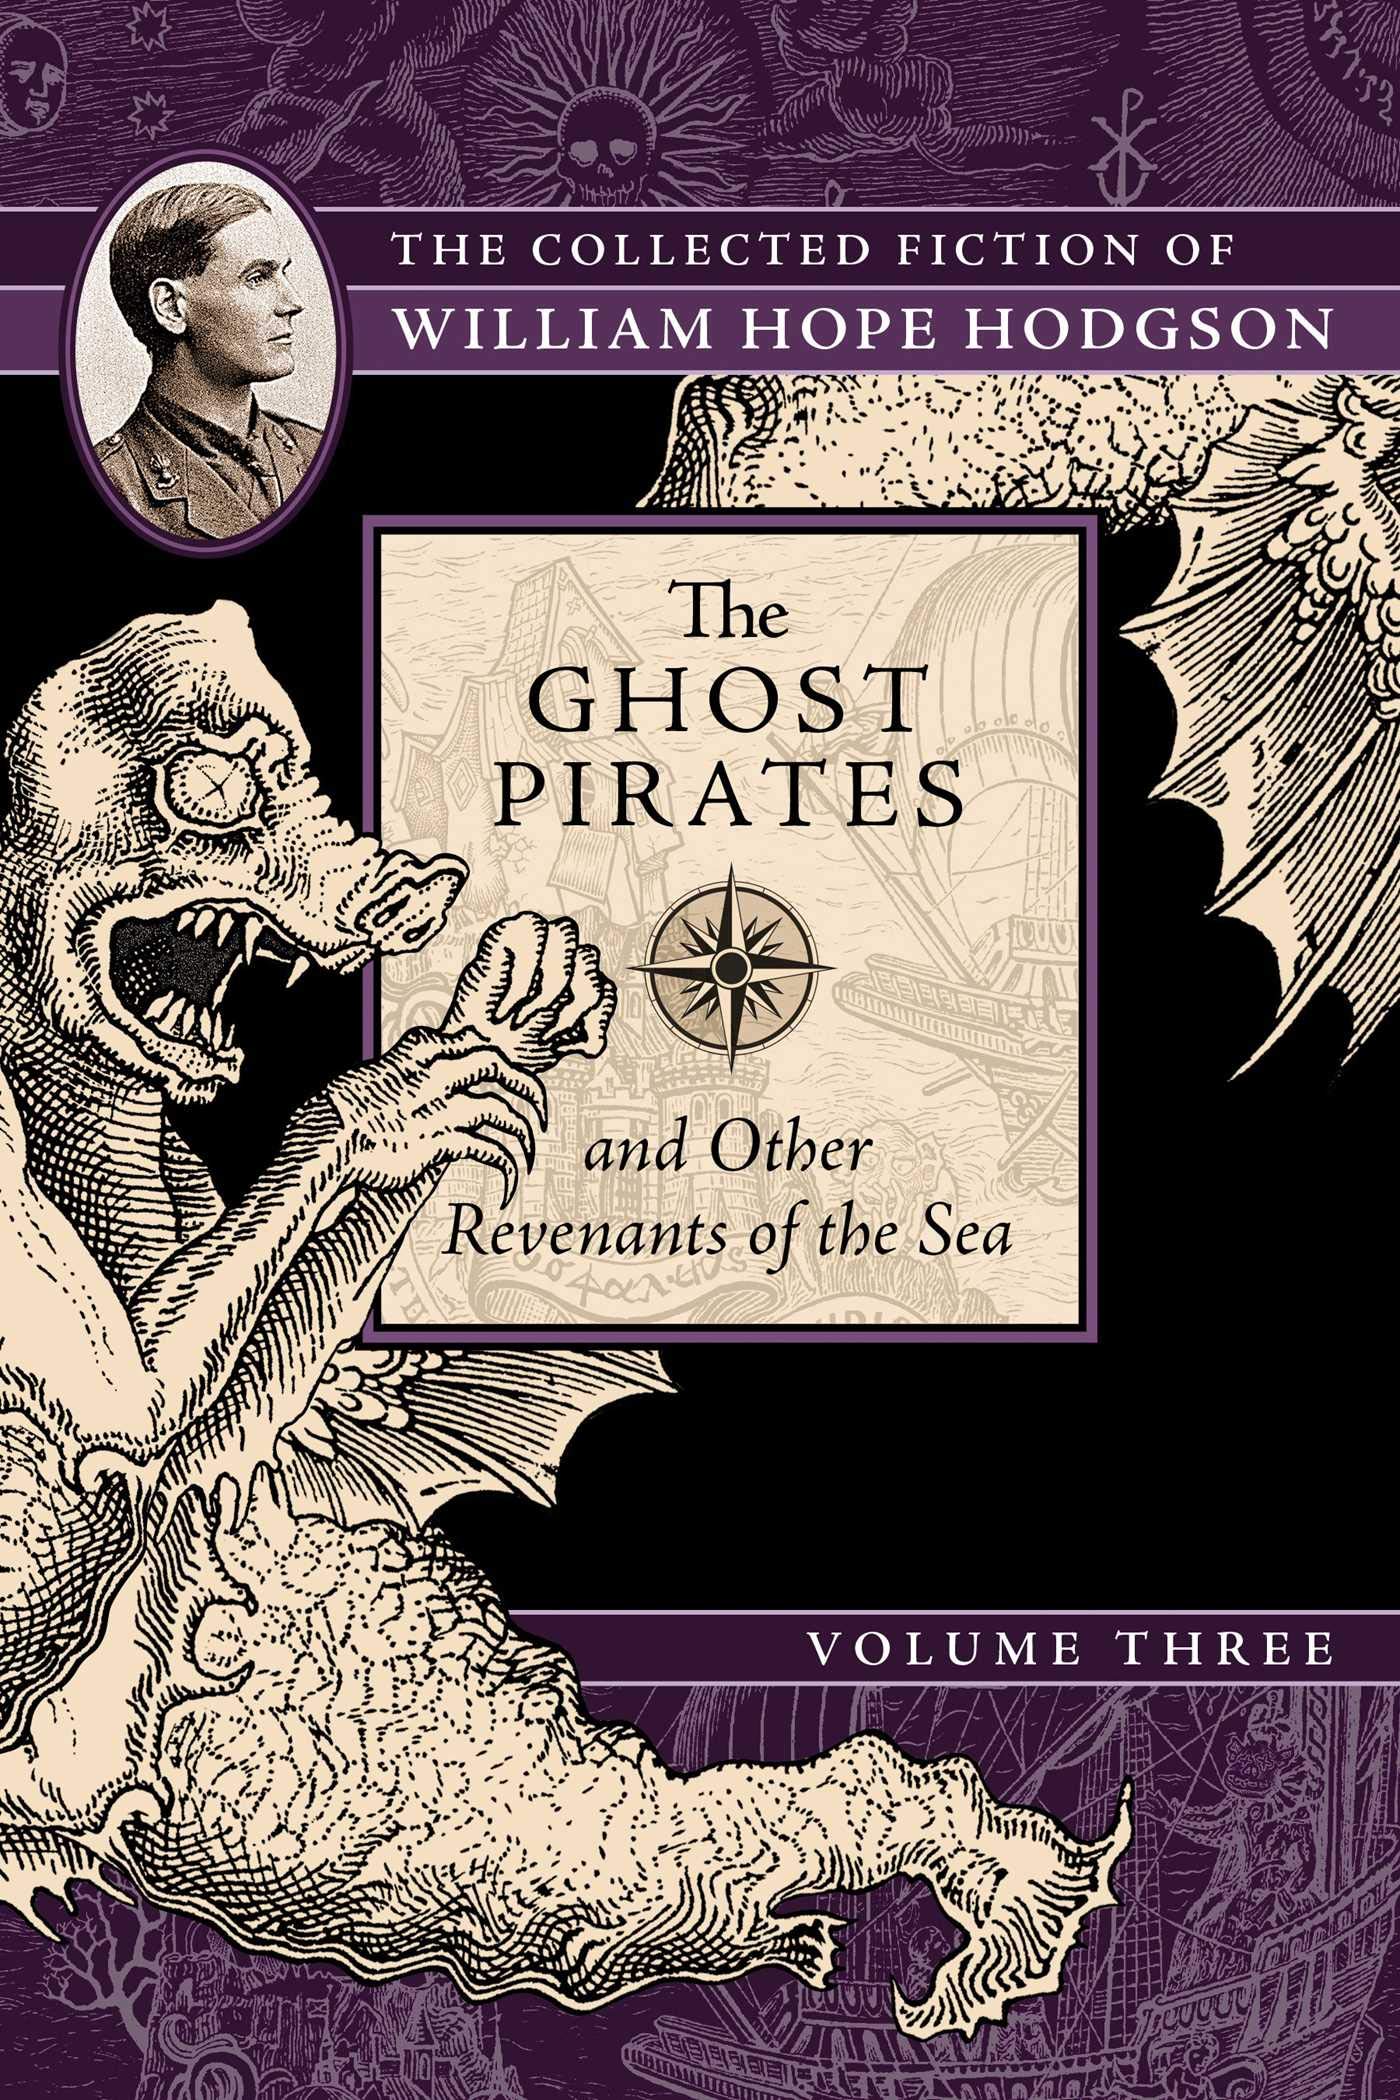 The Collected Fiction, Vol. 3: The Ghost Pirates and Other Revenants of the Sea